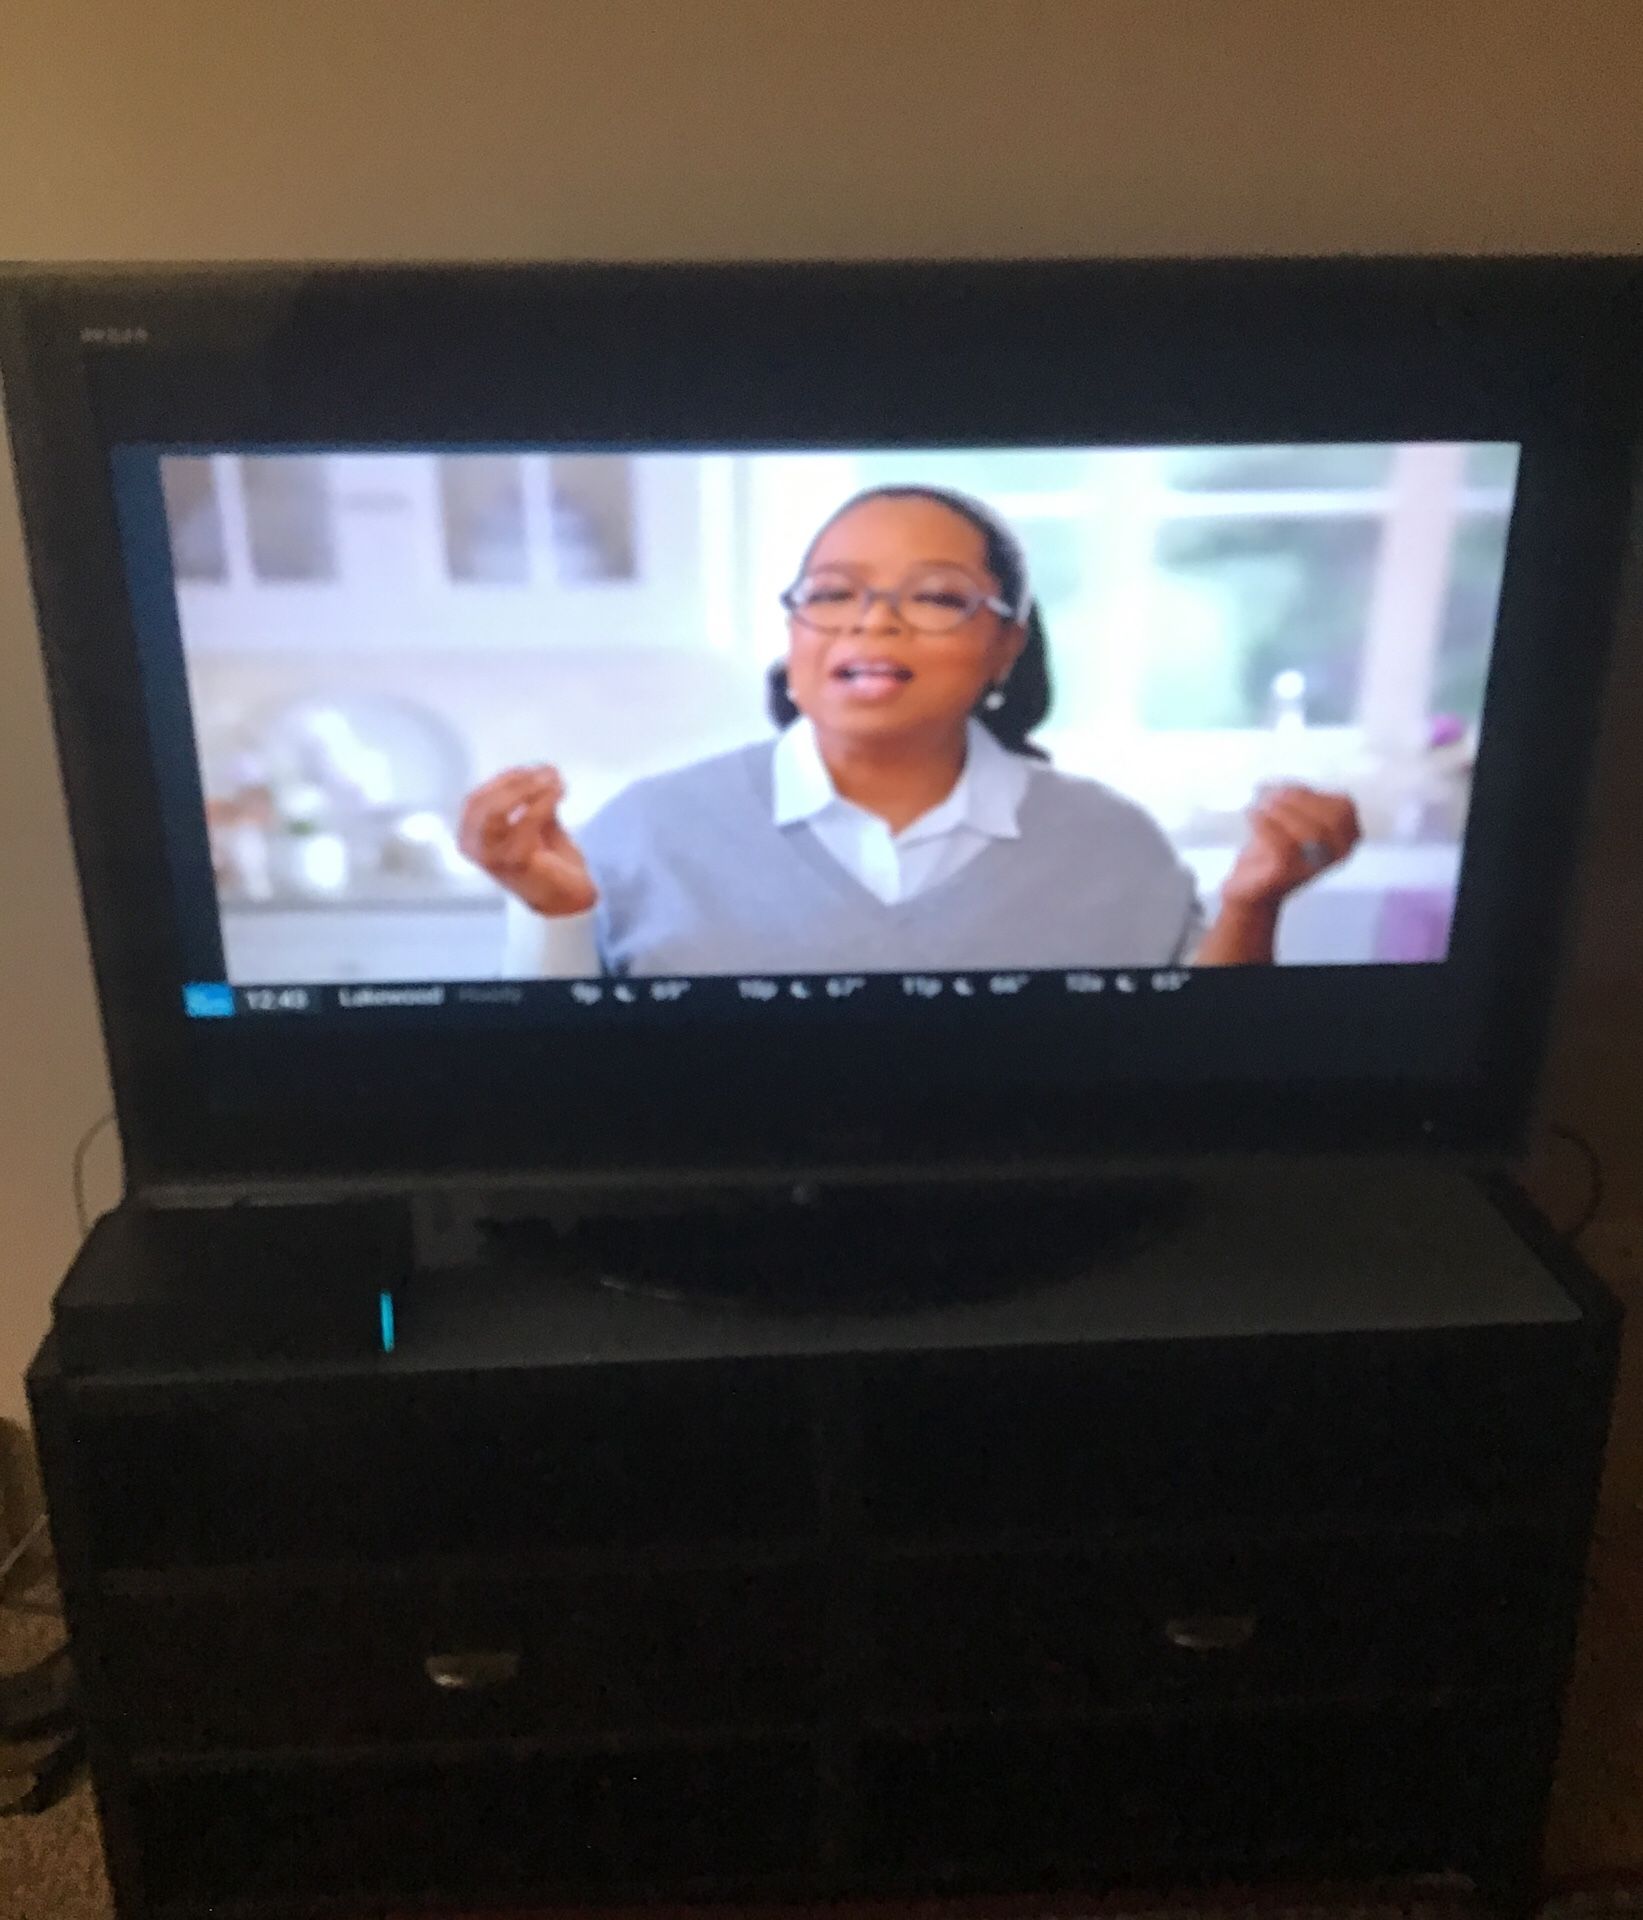 TV 46 inch Toshiba Regza LCD. Has SD card and USB flash drive. Moving must sell. Also will sell entertainment center. Make an offer!!! Selling cheap